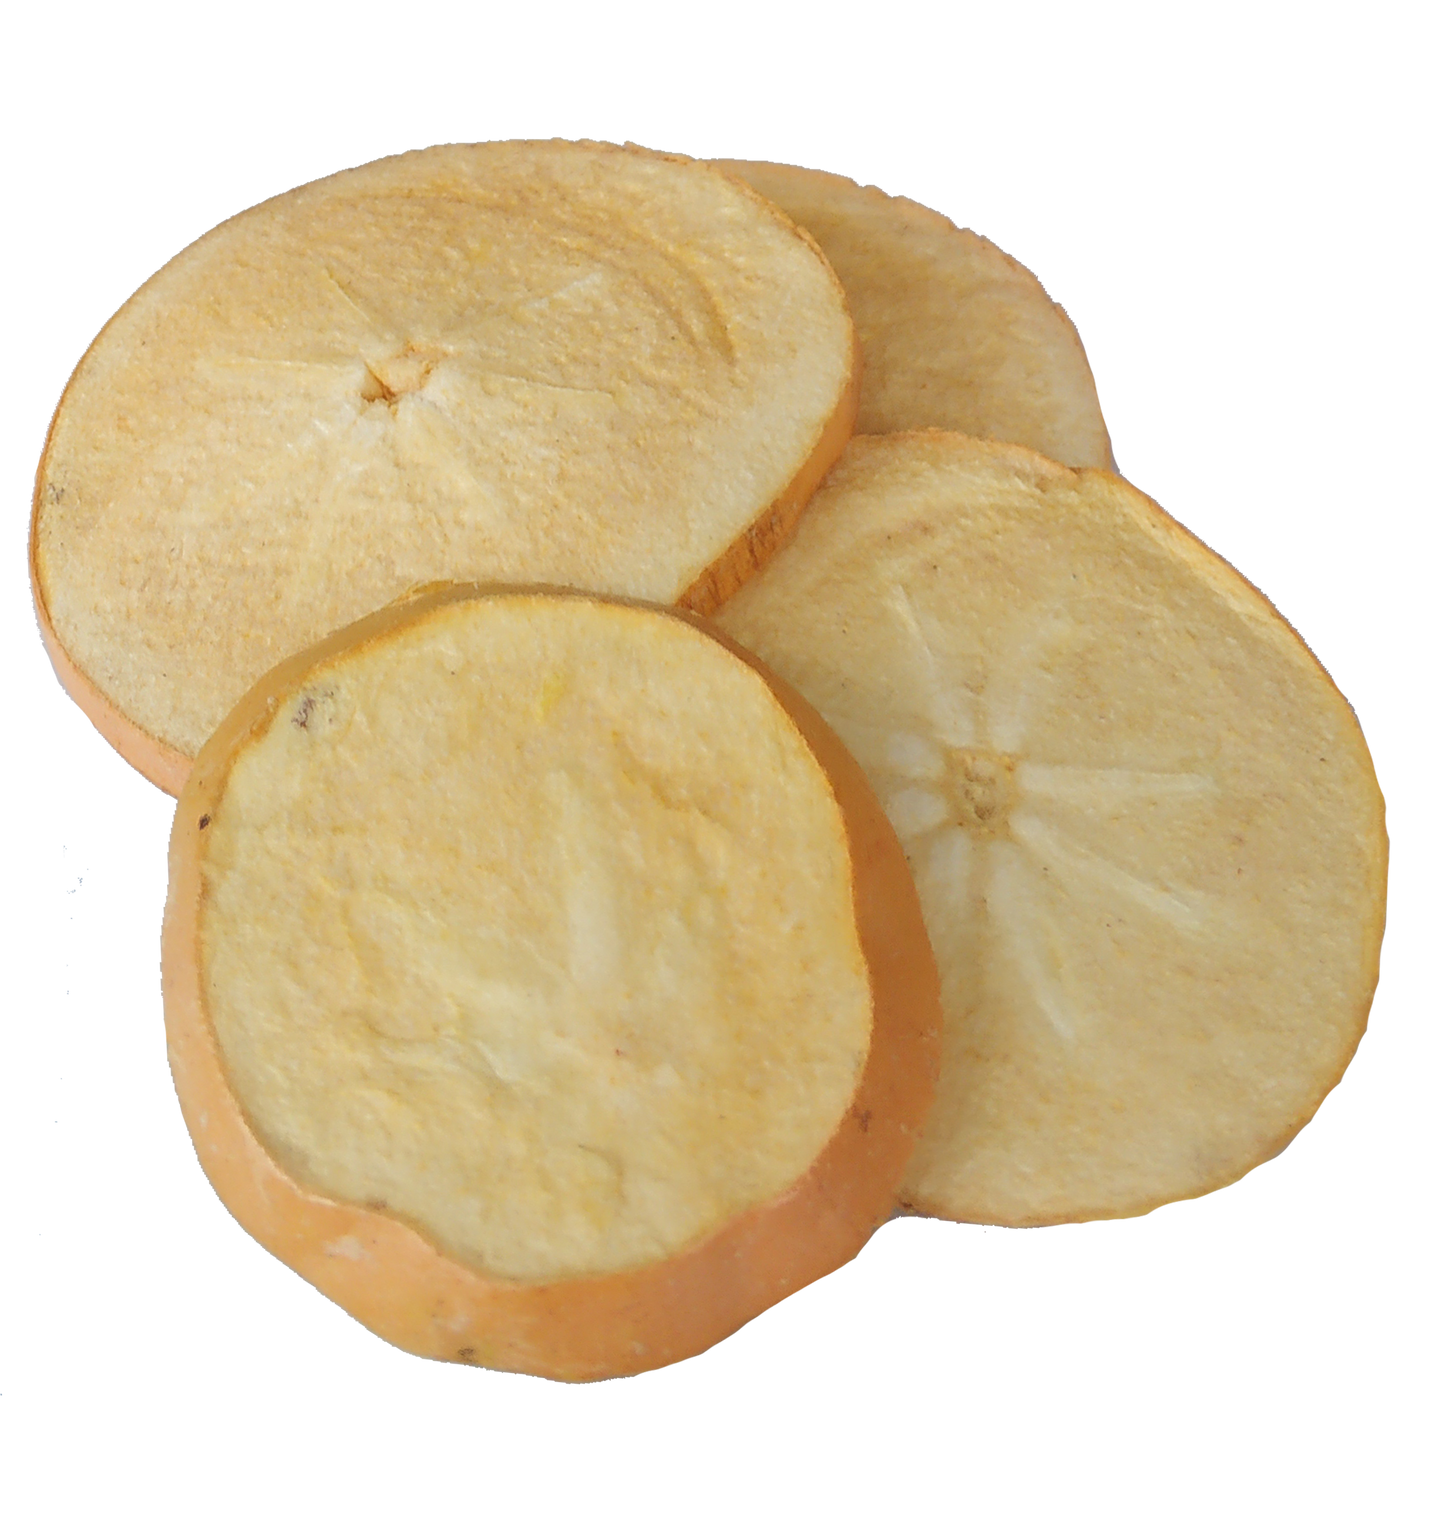 Freeze Dried Persimmon Snack Pouch by The Rotten Fruit Box